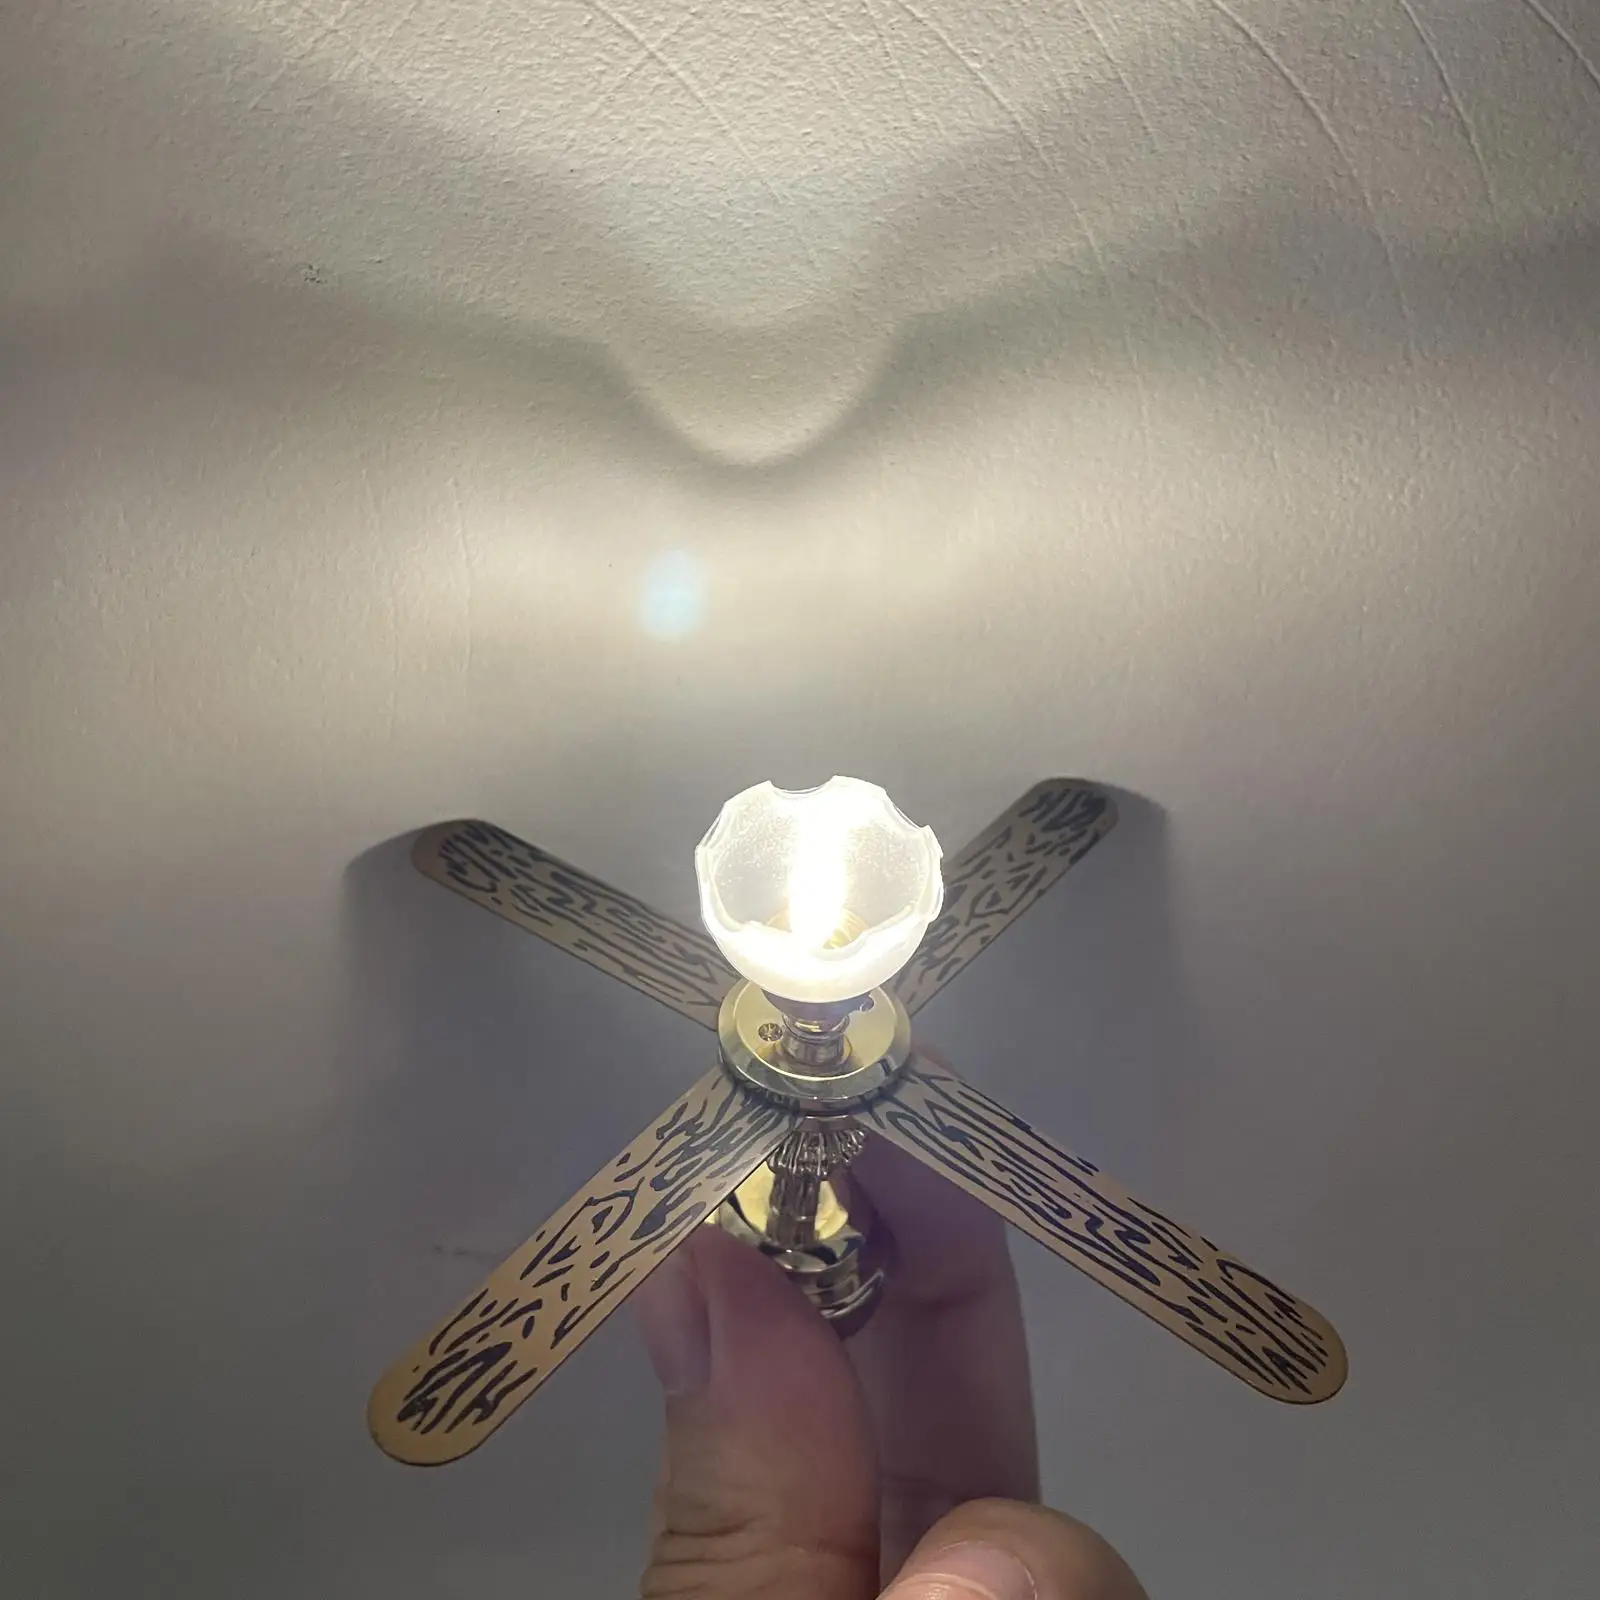 1:12 Dollhouse Ceiling Lamp Replaceable Battery Fan Light Frosted Lampshade Mini LED Lighting Dollhouse Decoration Play